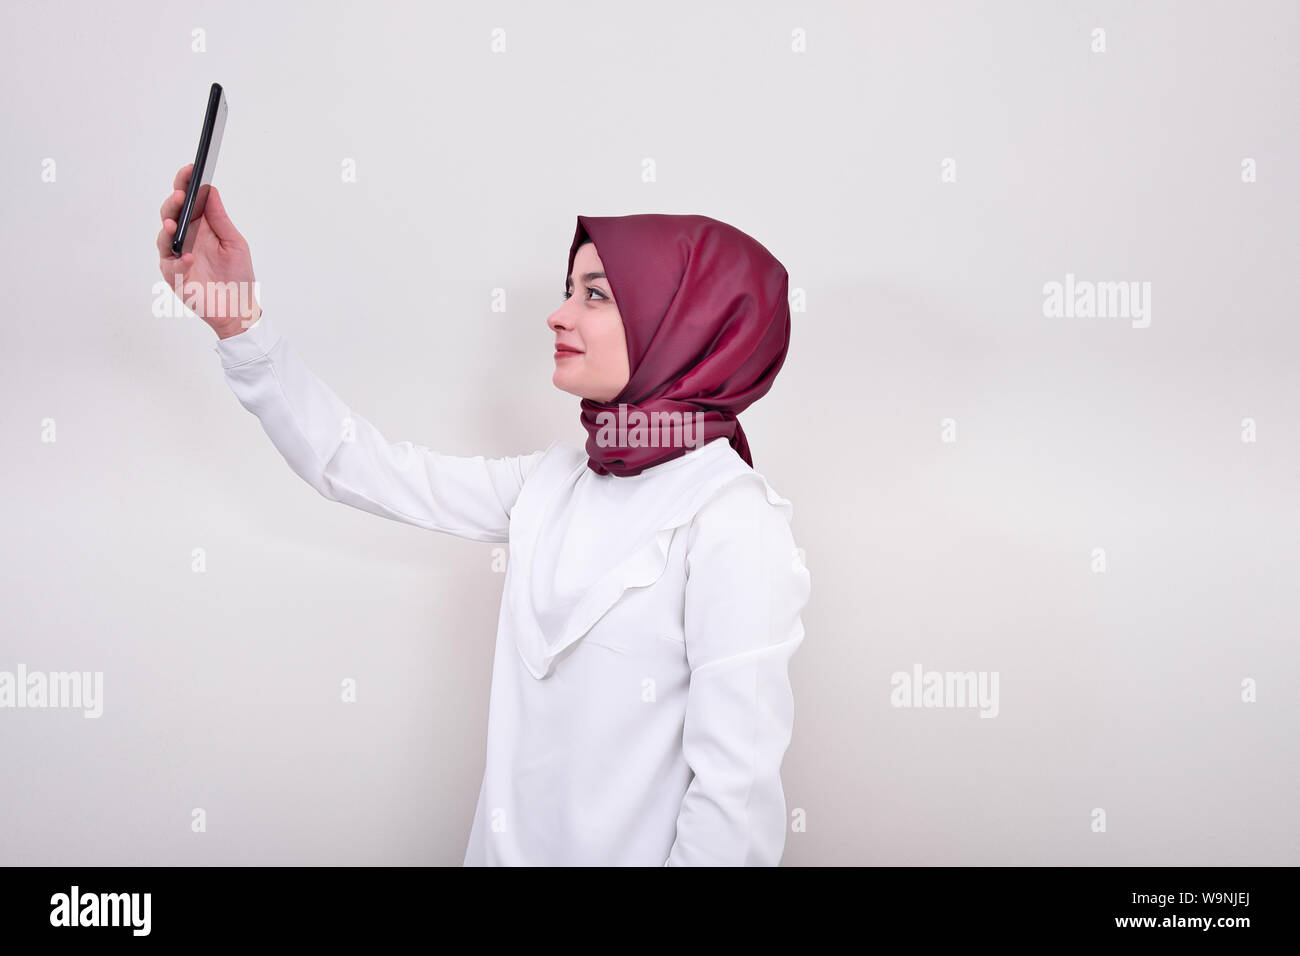 Muslim woman taking portrait selfie, girl in hijab and she taking selfie with mobile phone Stock Photo